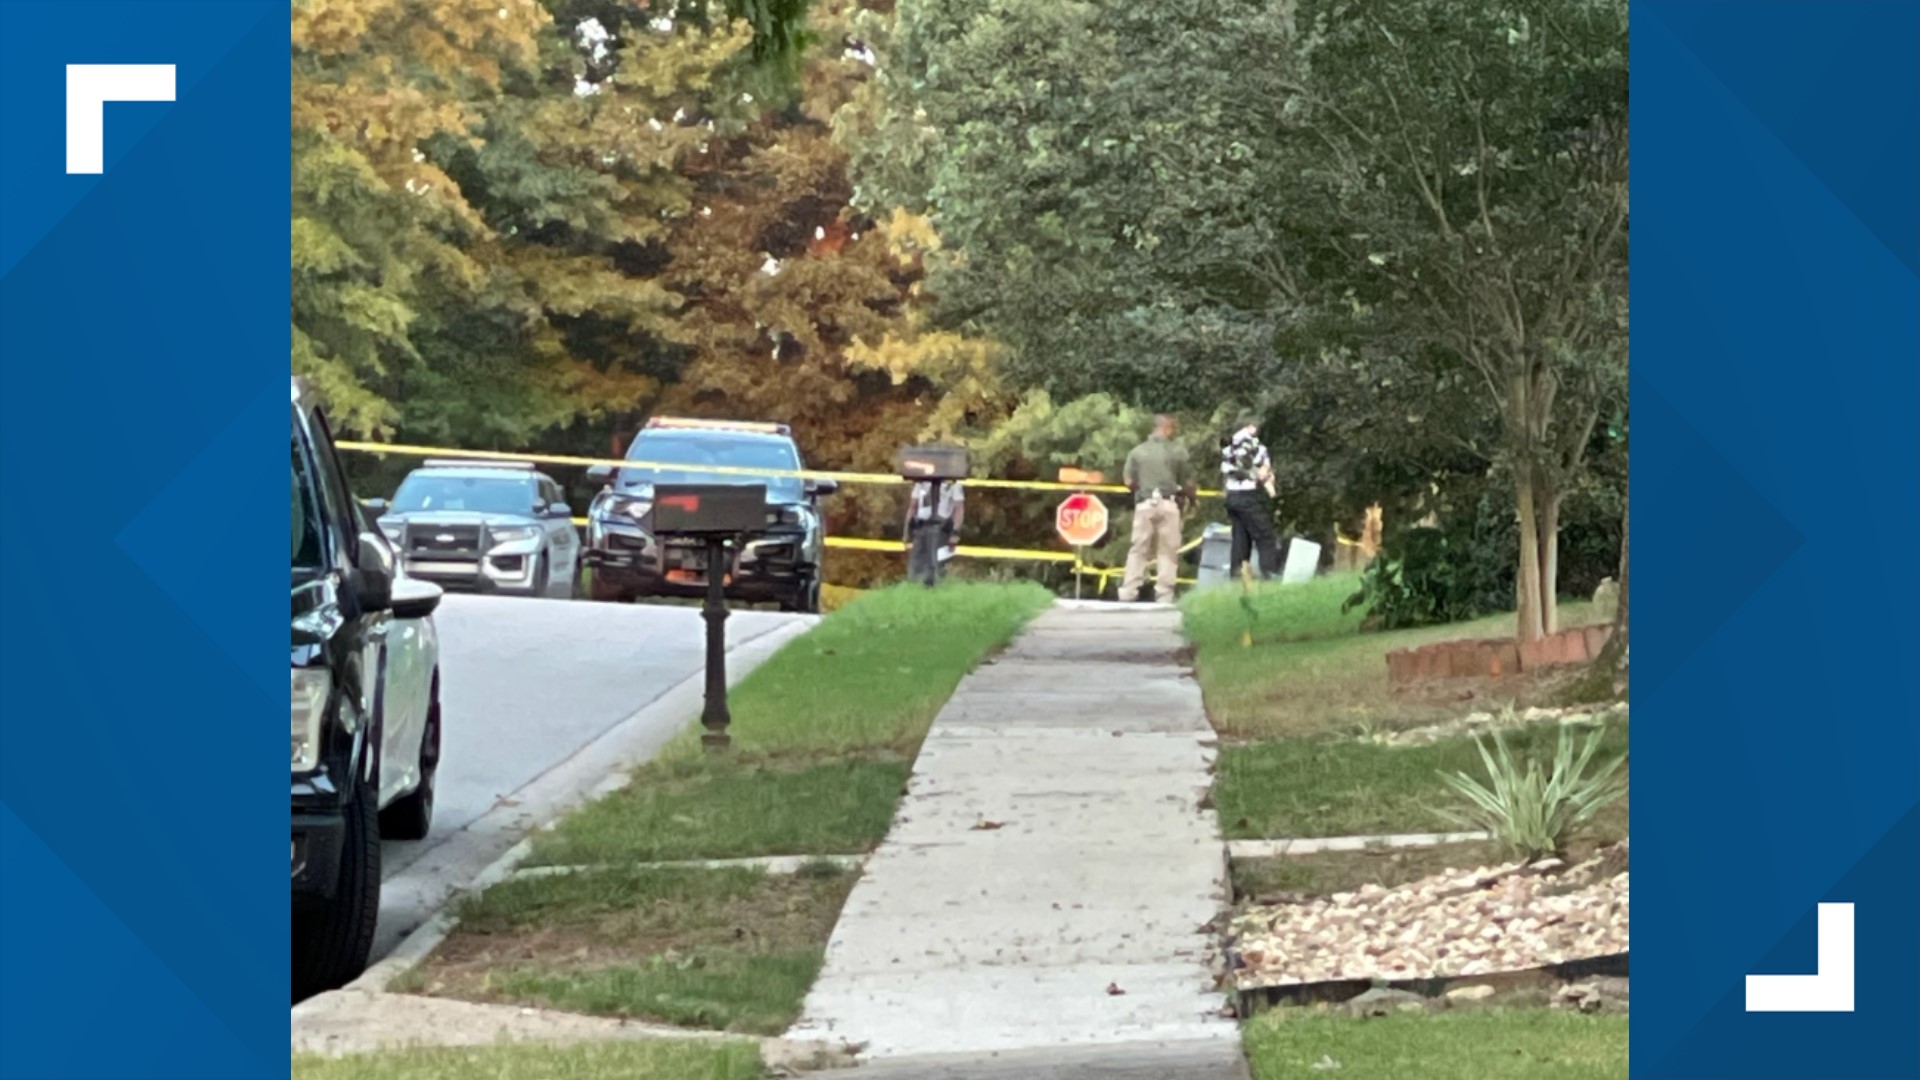 The shooting occurred in the Monarch Village subdivision at the cross streets of Brookwater Drive and Monarch Village Way.